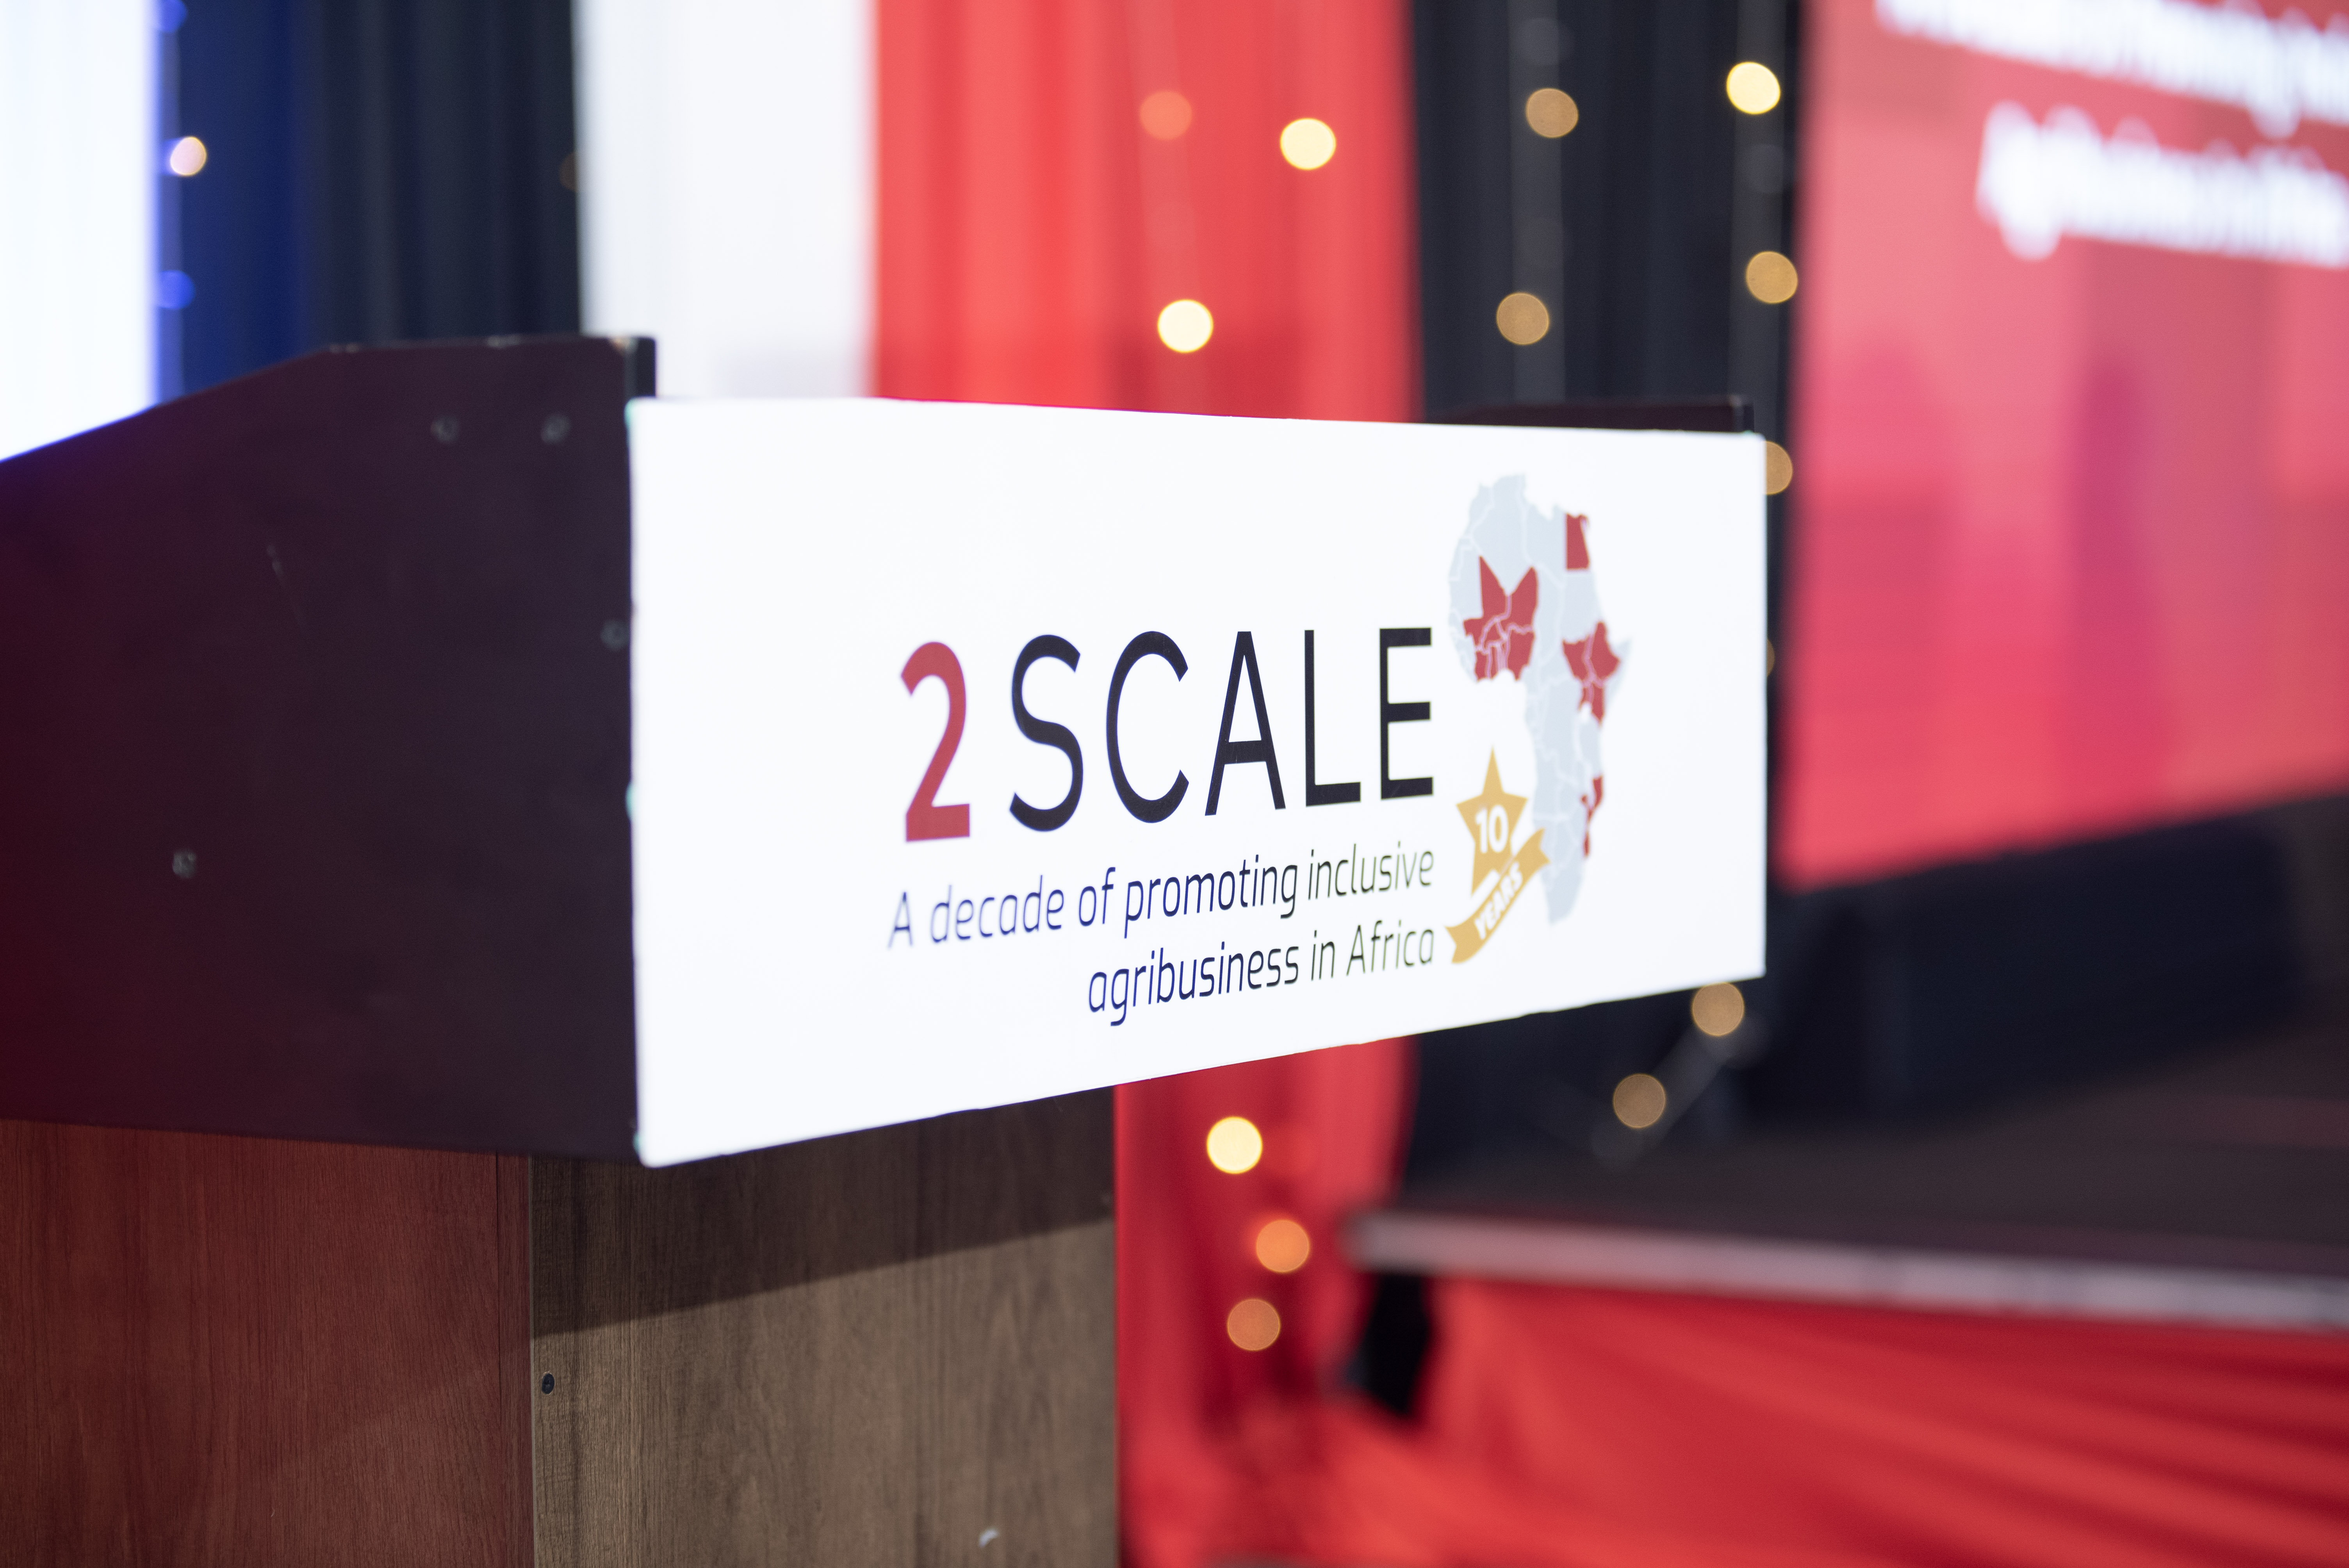 The 2SCALE 10-year anniversary logo is displayed on a podium during the kickoff event.